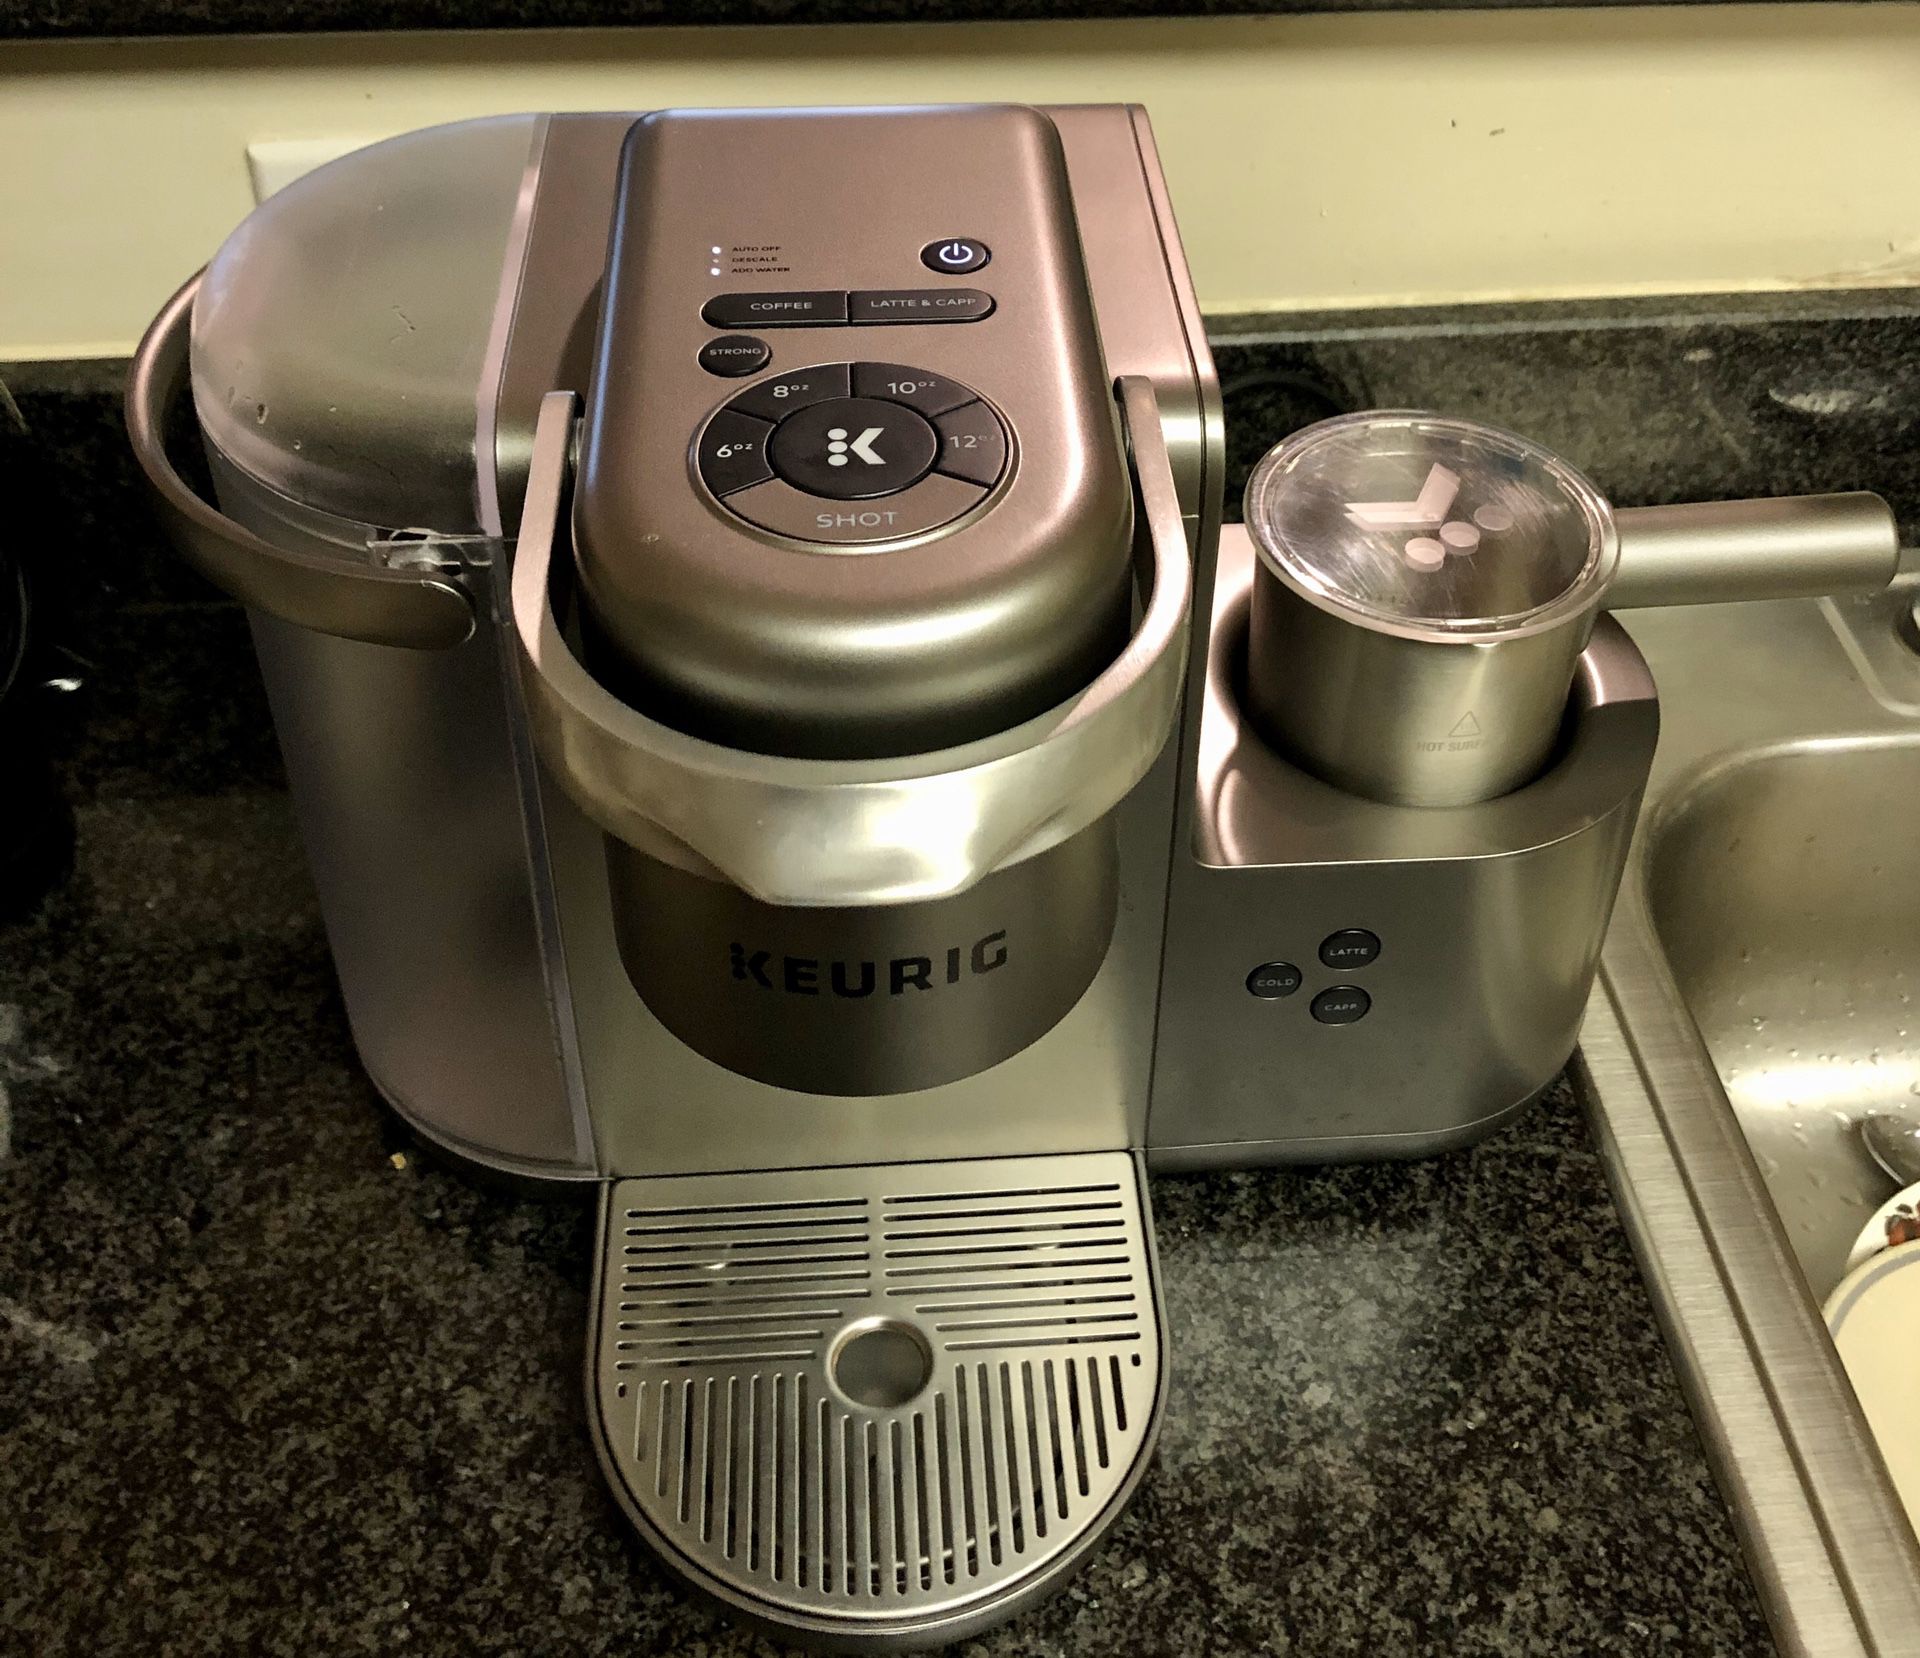 Like NEW Keurig coffee, latte and cappuccino maker